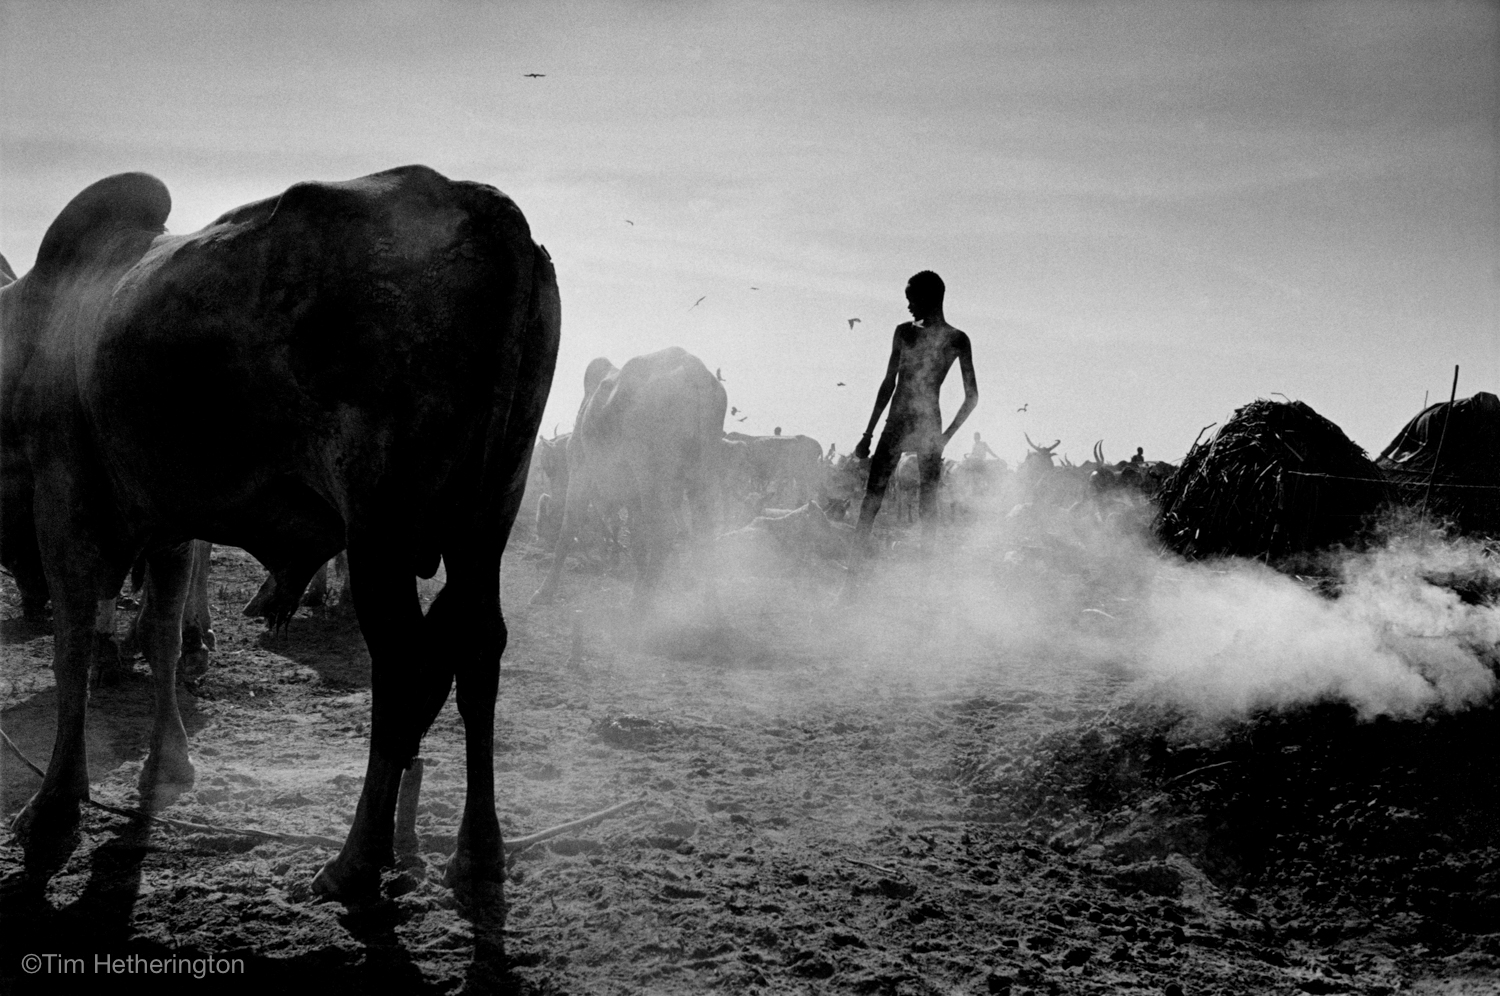  SUDAN. Panyagor. May 2000. Cattle camp. An outbreak of foot and mouth disease affected the precious cattle of the Dinka tribe in South Sudan. 